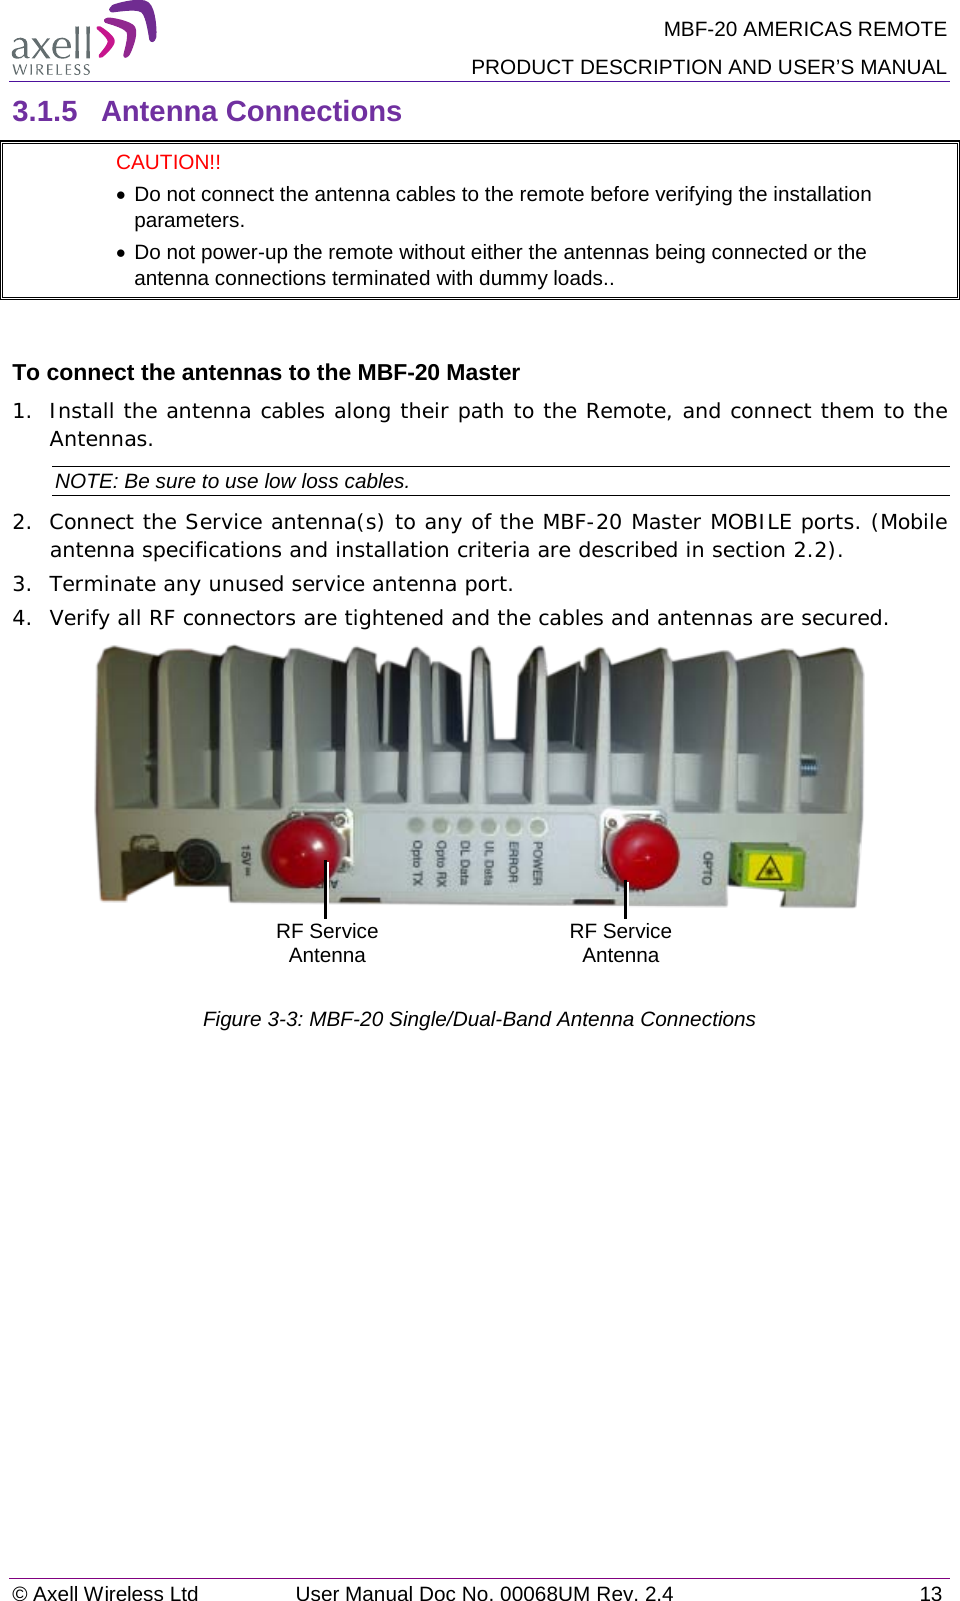 MBF-20 AMERICAS REMOTE PRODUCT DESCRIPTION AND USER’S MANUAL © Axell Wireless Ltd User Manual Doc No. 00068UM Rev. 2.4 13  3.1.5  Antenna Connections   CAUTION!!  • Do not connect the antenna cables to the remote before verifying the installation parameters.  • Do not power-up the remote without either the antennas being connected or the antenna connections terminated with dummy loads..  To connect the antennas to the MBF-20 Master 1.  Install the antenna cables along their path to the Remote, and connect them to the Antennas. NOTE: Be sure to use low loss cables. 2.  Connect the Service antenna(s) to any of the MBF-20 Master MOBILE ports. (Mobile antenna specifications and installation criteria are described in section  2.2). 3.  Terminate any unused service antenna port. 4.  Verify all RF connectors are tightened and the cables and antennas are secured.    Figure  3-3: MBF-20 Single/Dual-Band Antenna Connections    RF Service Antenna RF Service Antenna 